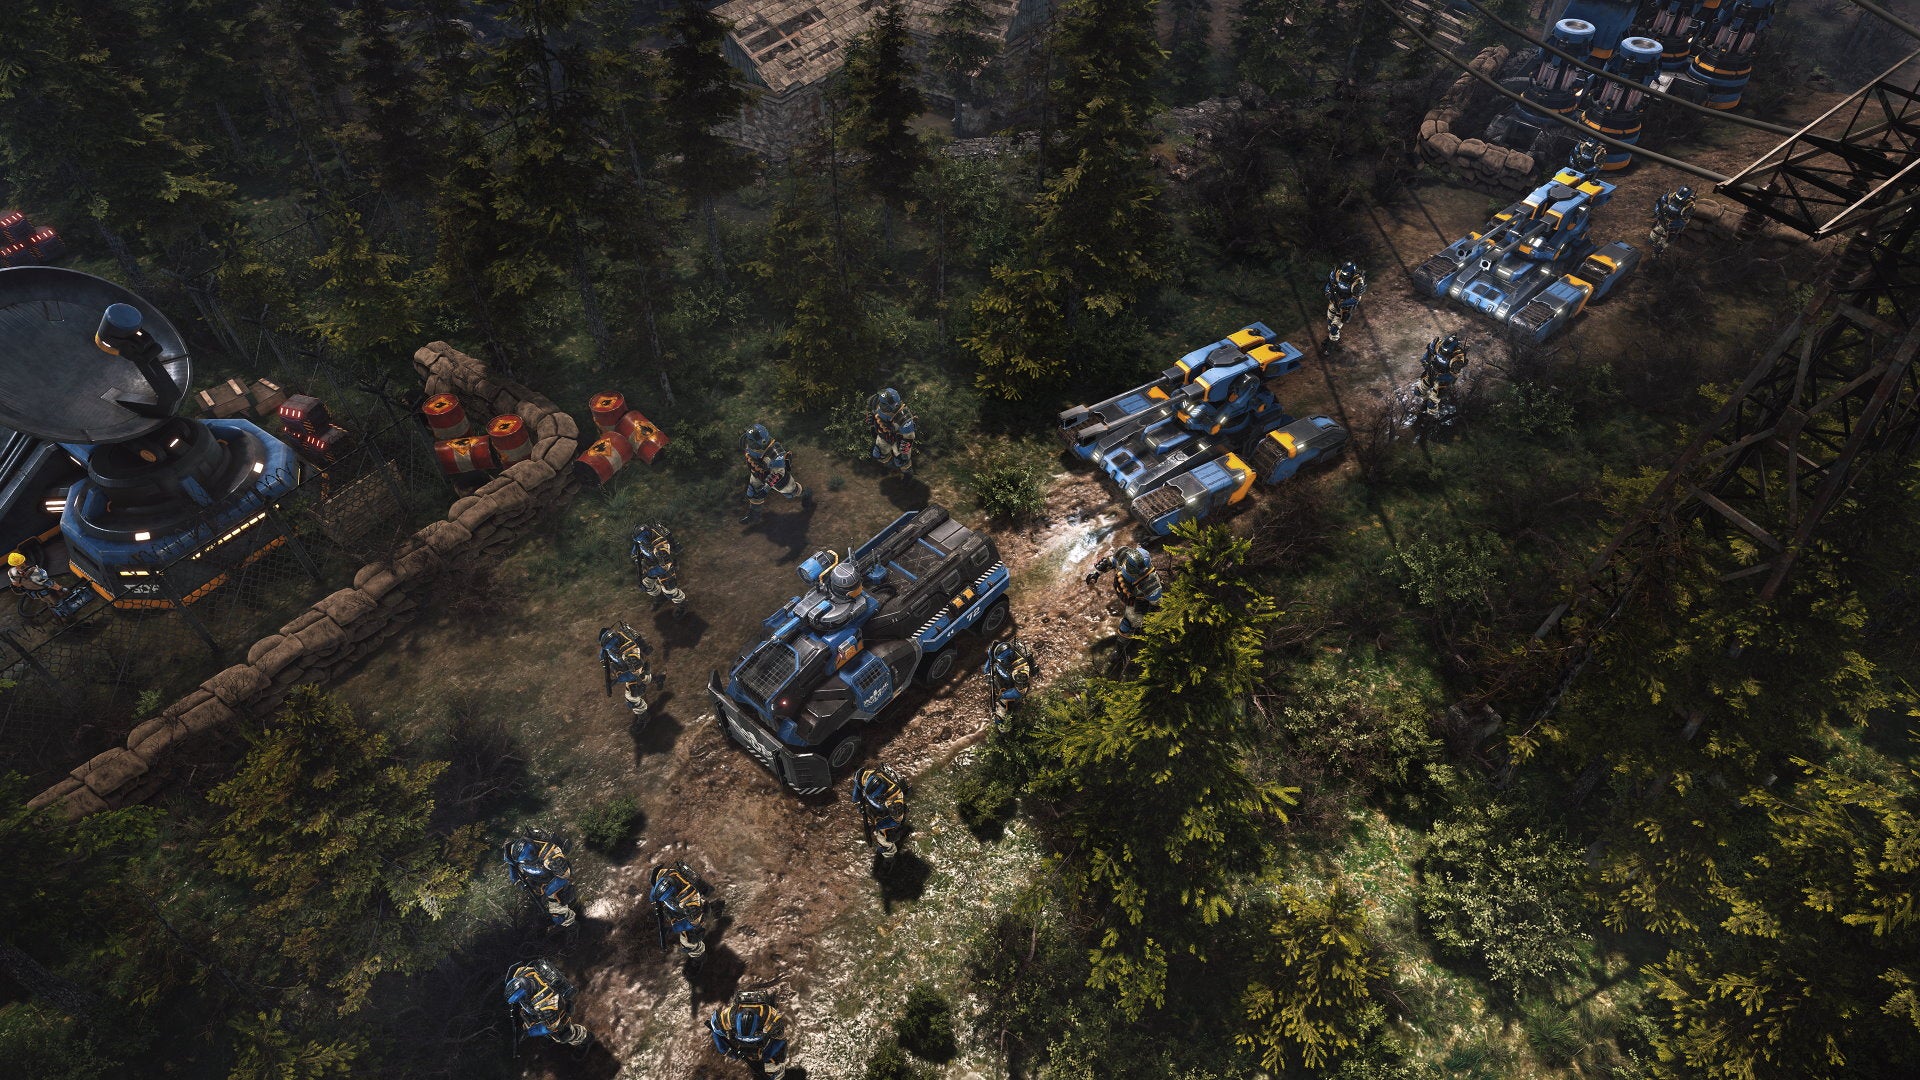 Tanks move into position in Tempest Rising